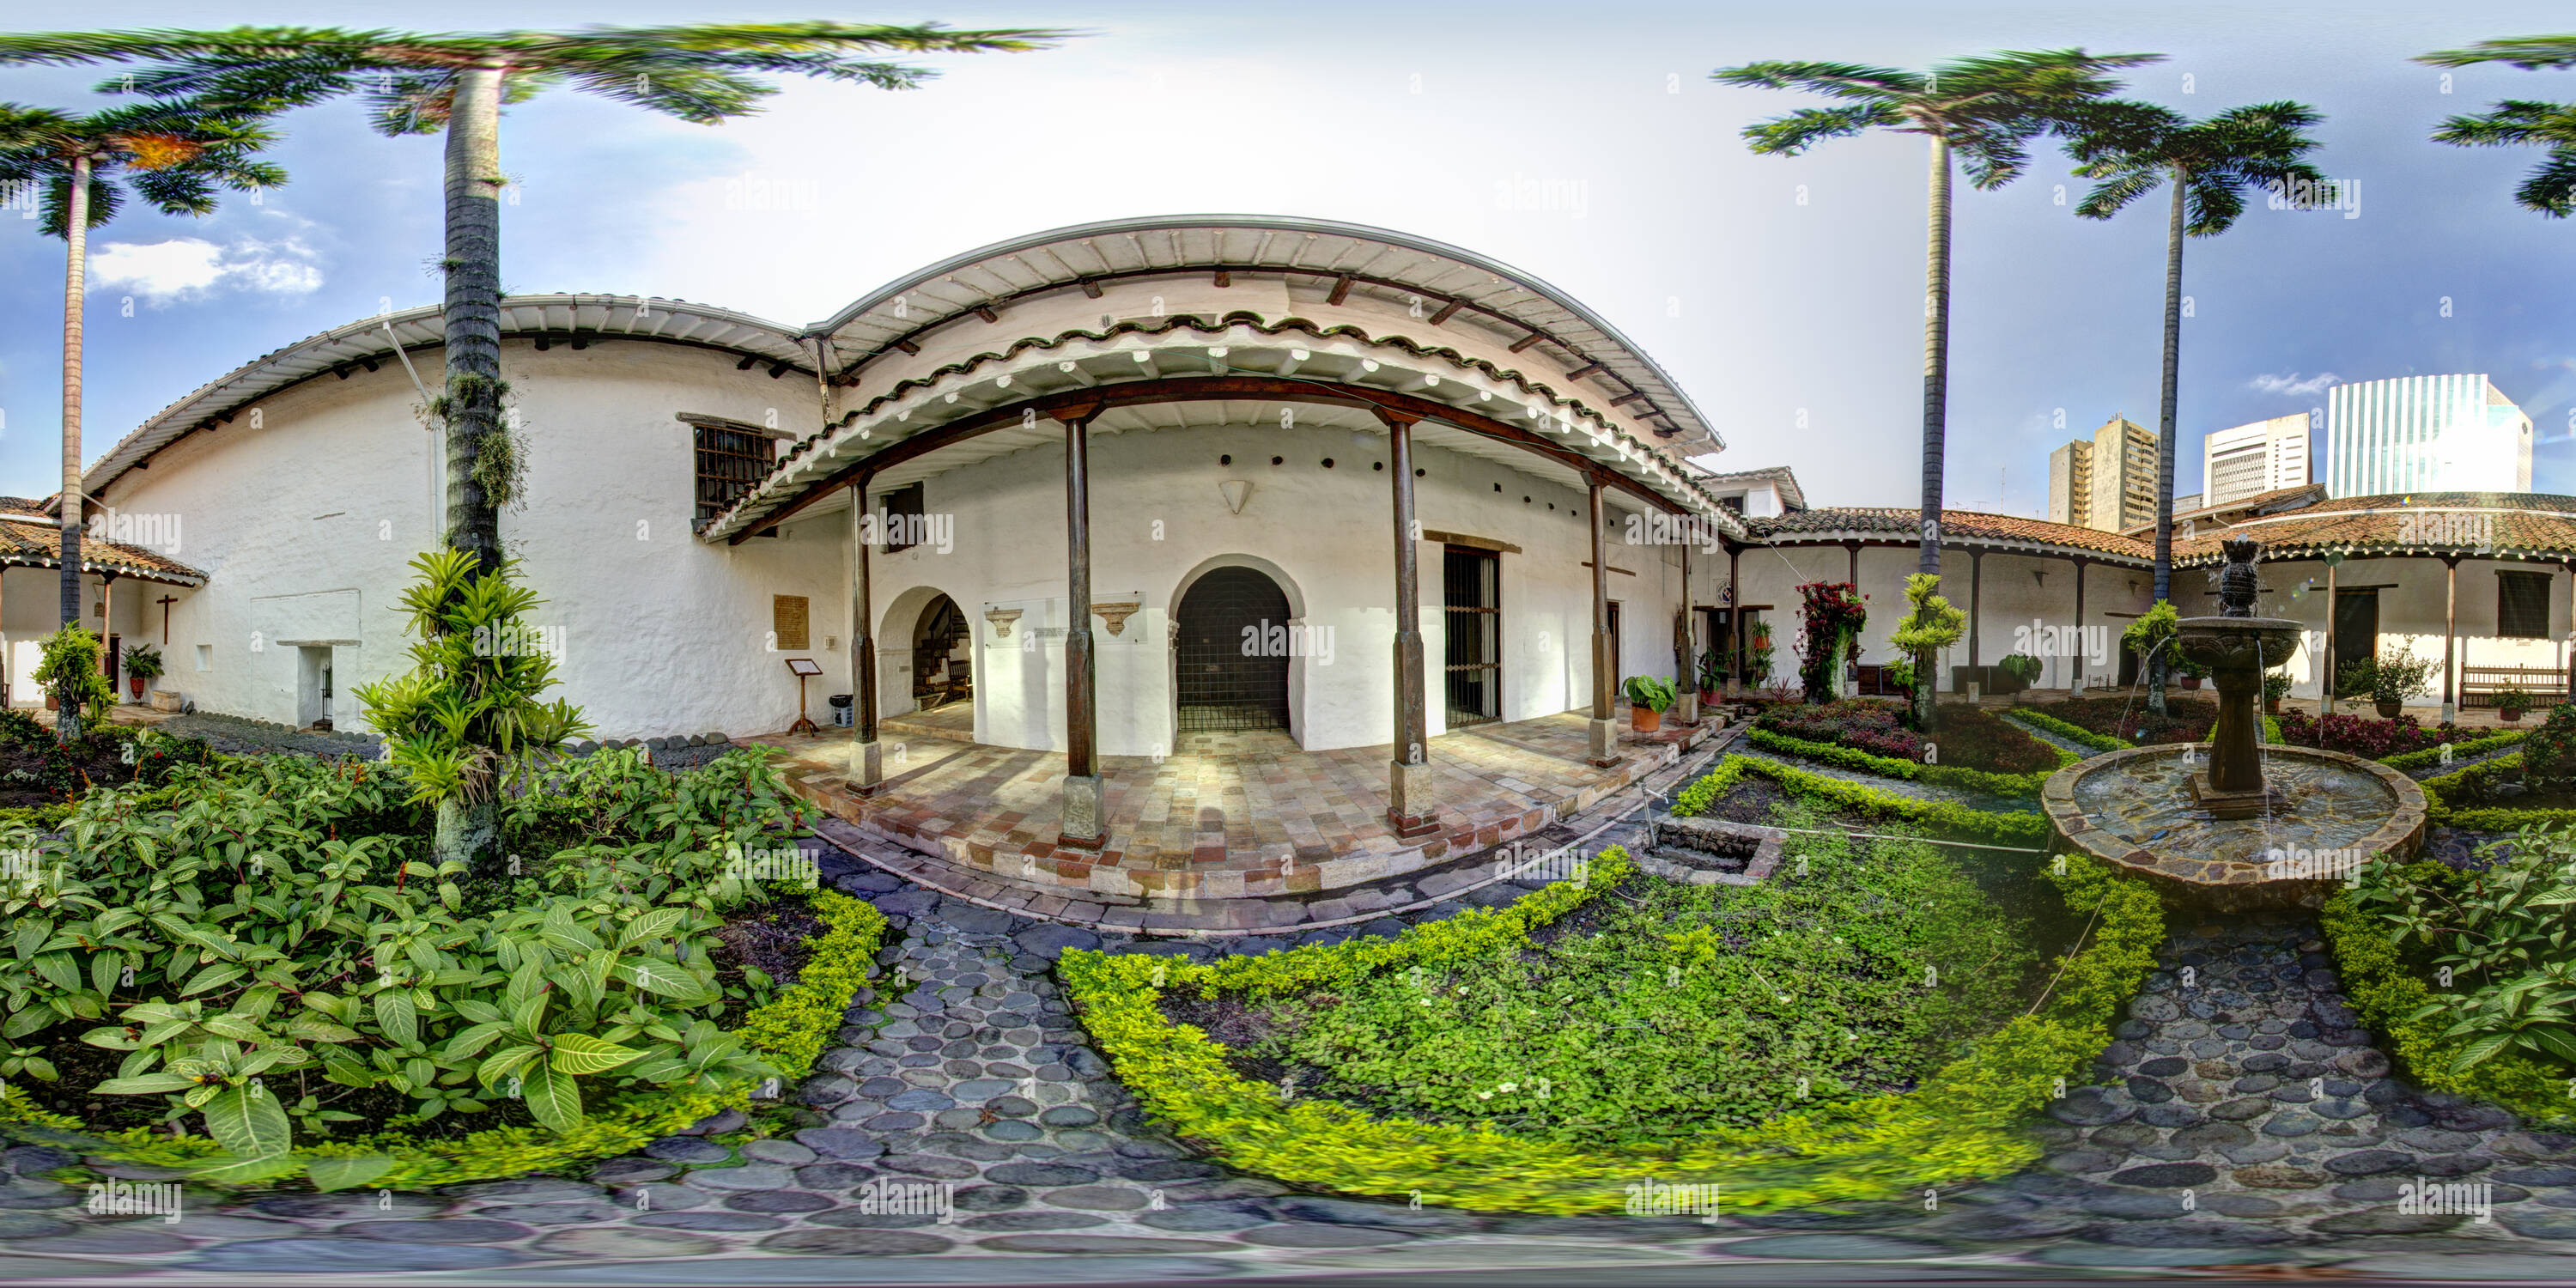 360 degree panoramic view of Museo de La Merced, Cali, Colombia